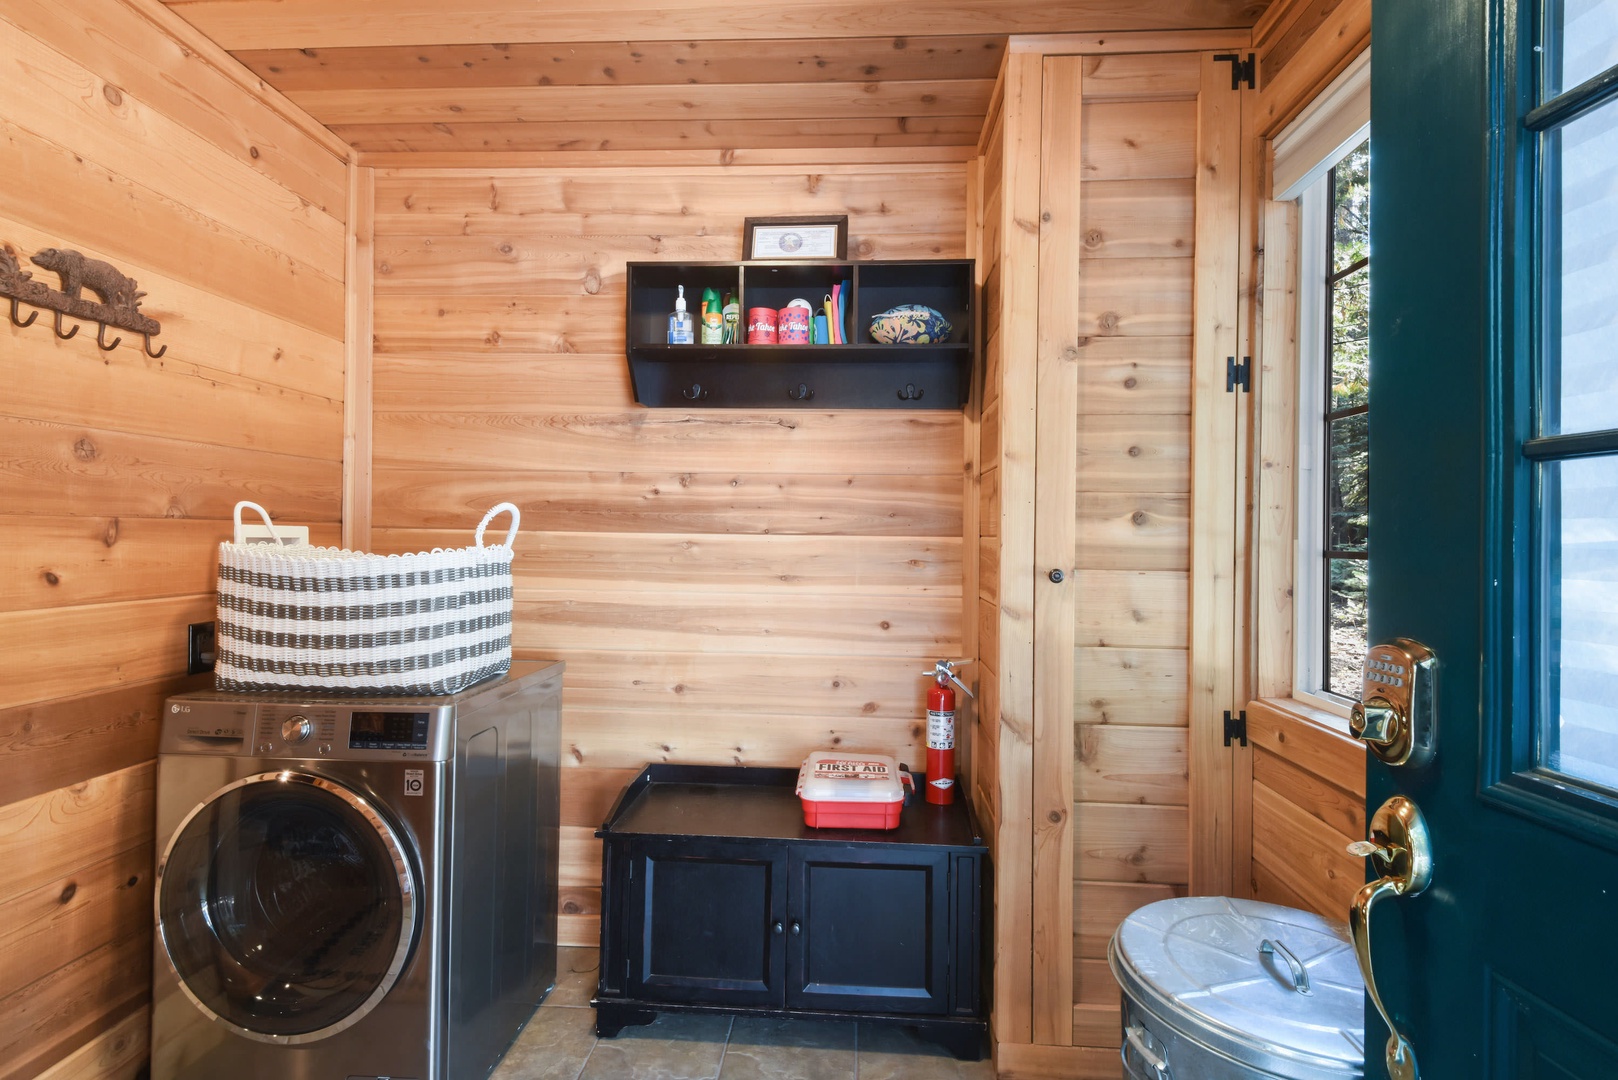 Mud room for storing skis, snowboards, boots - has washer no dryer